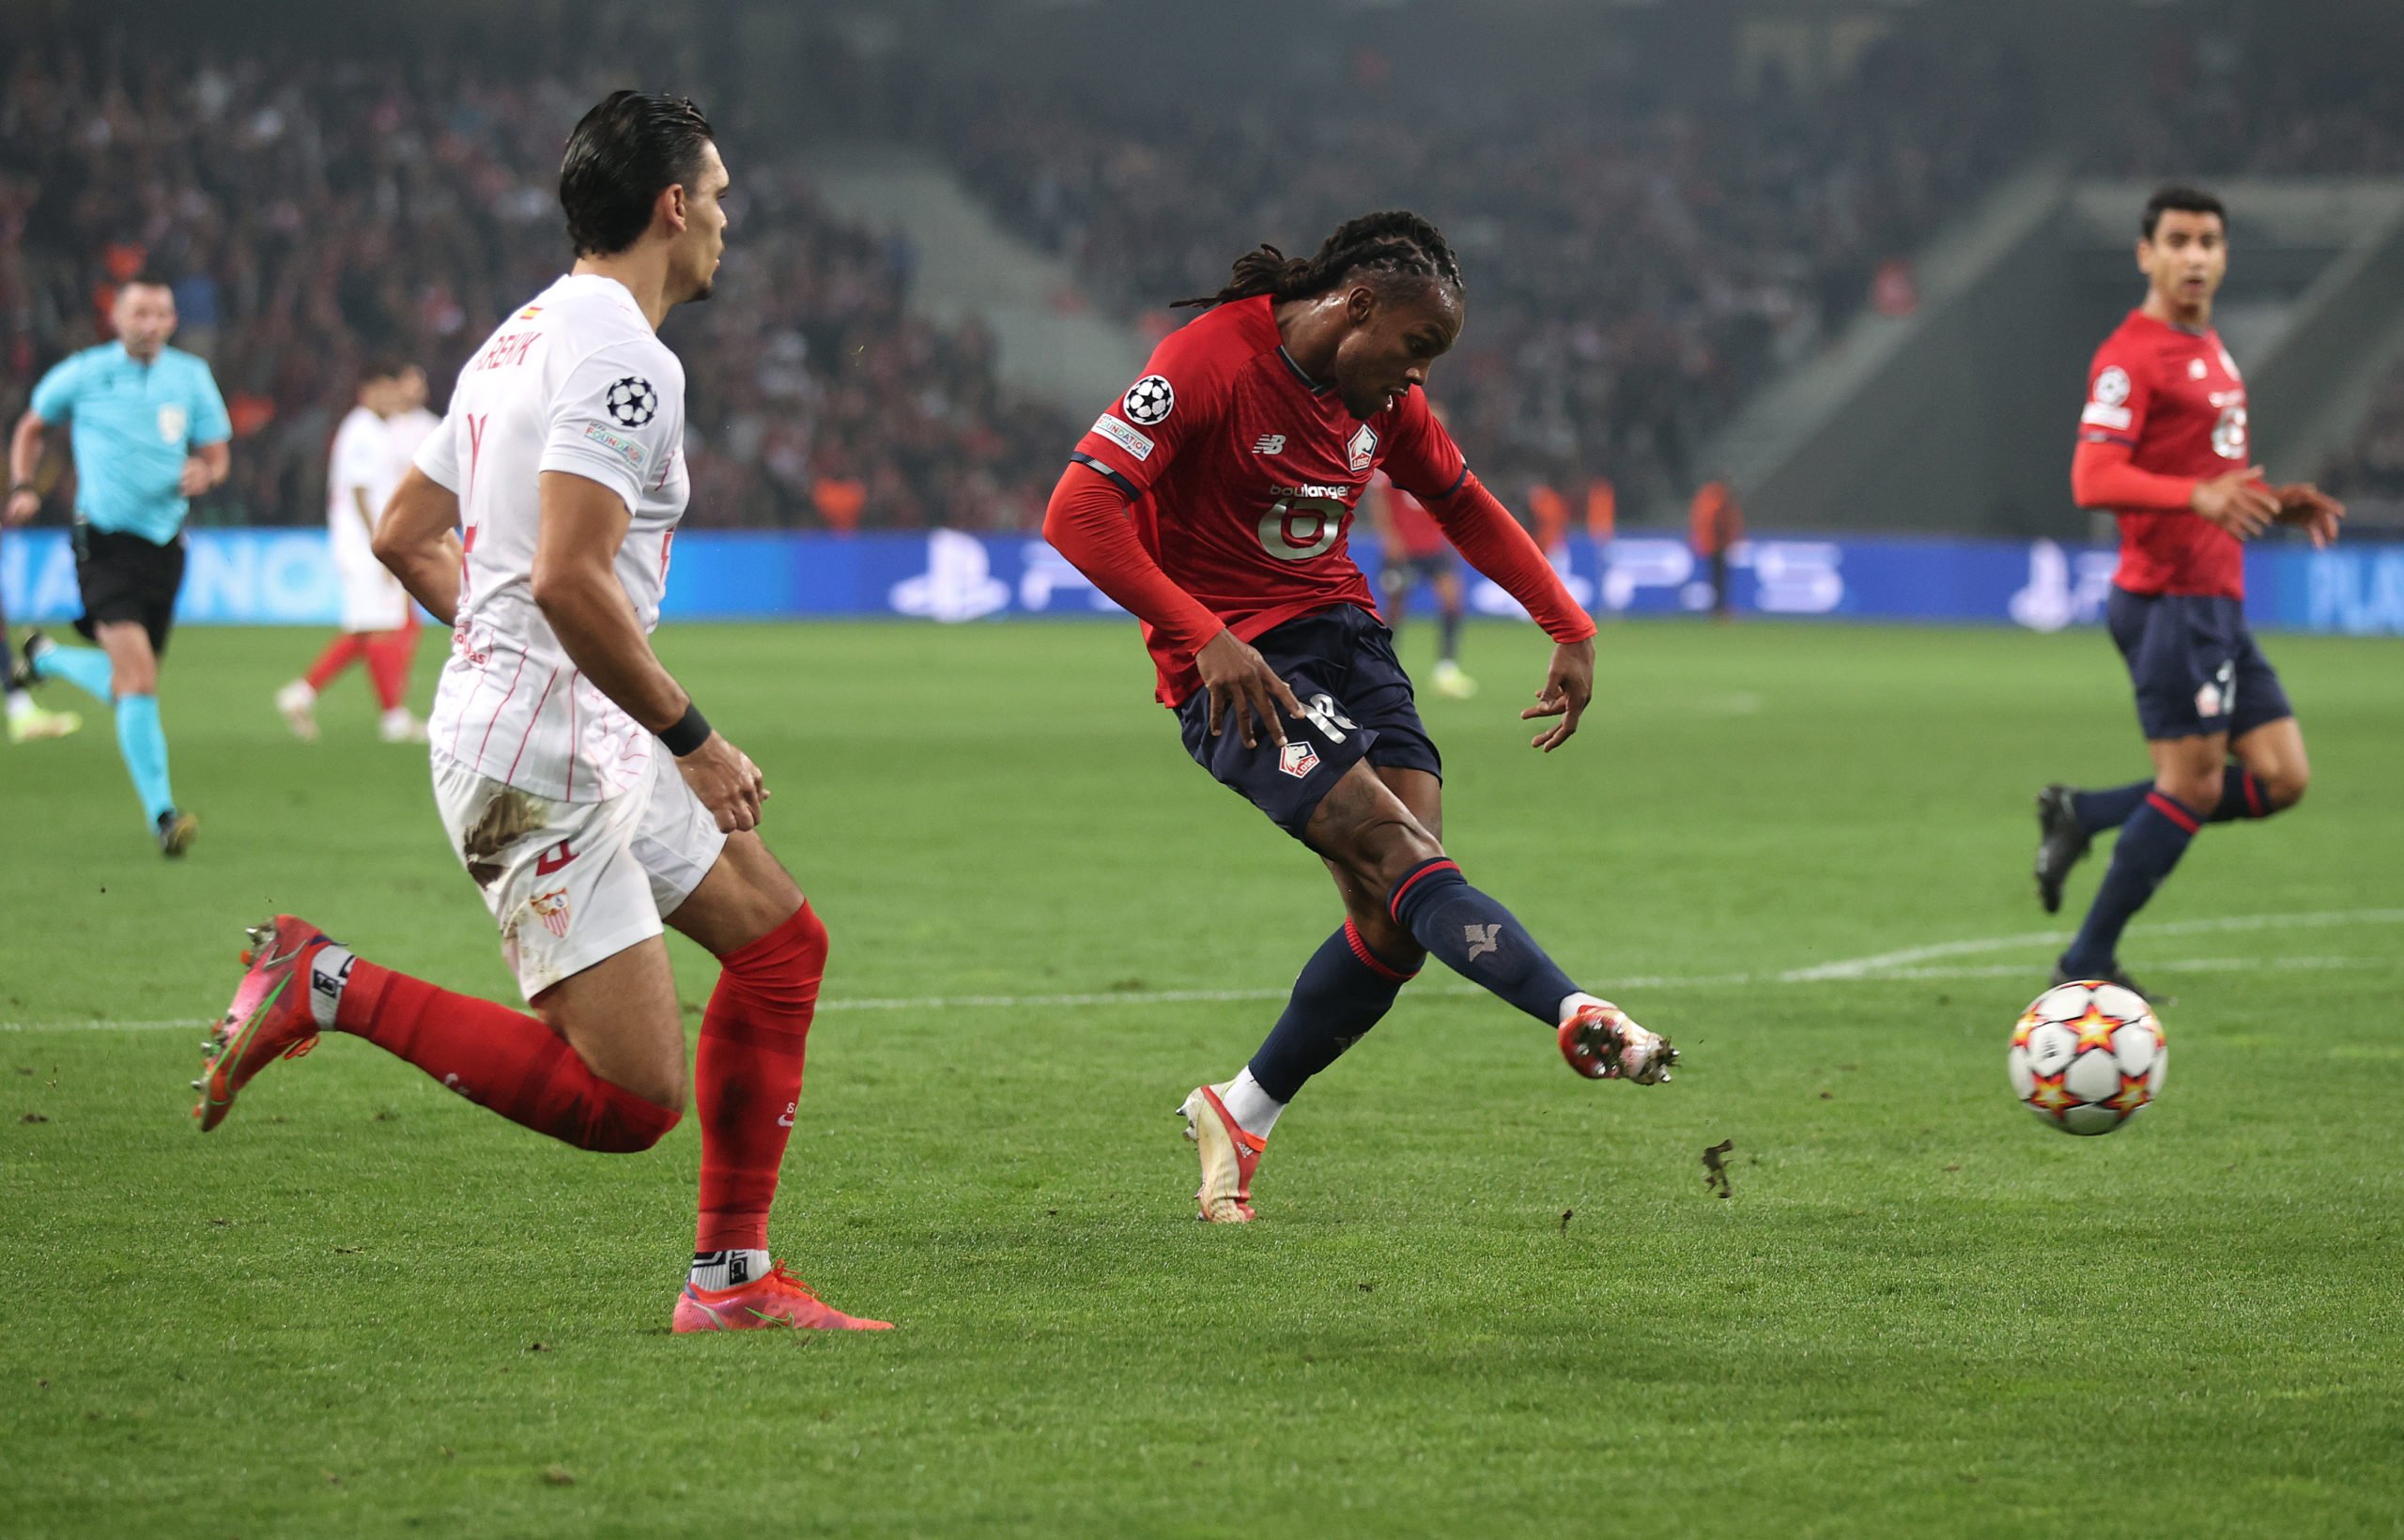 LILLE, FRANCE - OCTOBER 20:  Renato Sanches of Lille shoots at goal during the UEFA Champions League group G match between Lille OSC and Sevilla FC at Stade Pierre-Mauroy on October 20, 2021 in Lille, France. (Photo by Julian Finney/Getty Images)The 4th Official uses images provided by the following image agency: Getty Images (https://www.gettyimages.de/) Imago Images (https://www.imago-images.de/)